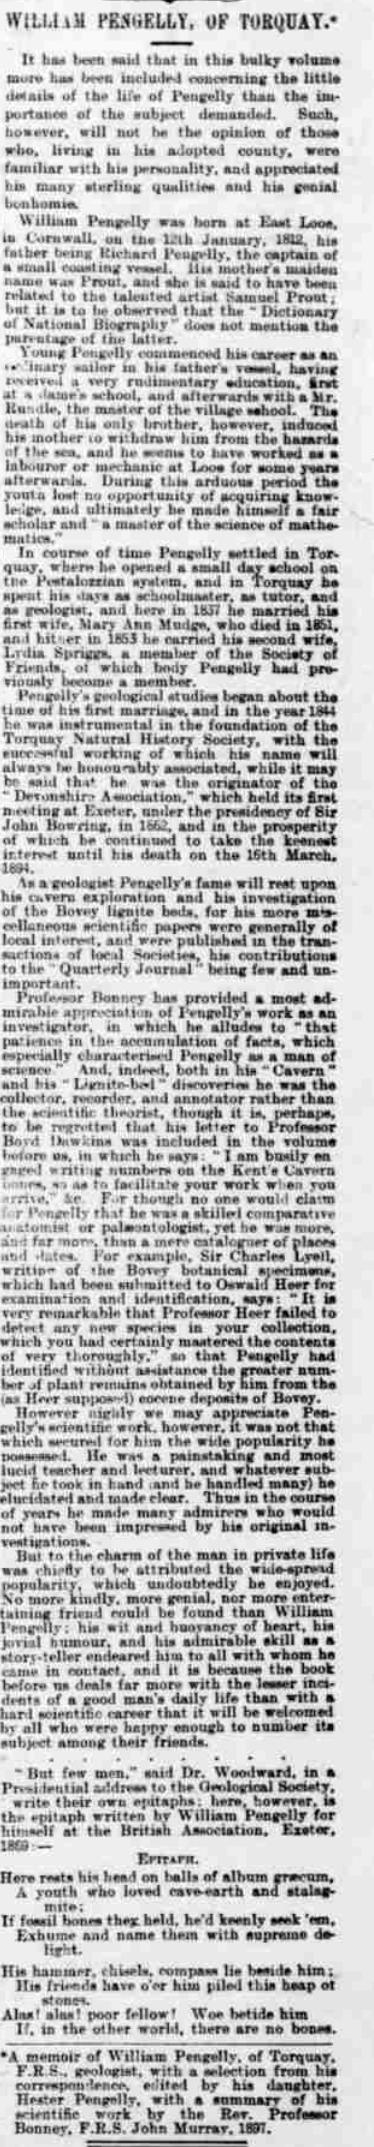 Article describing Pengelly's life and work, from the Devon and Exeter Gazette, 16 November 1897.  Newspaper image © The British Library Board.  All rights reserved. With thanks to The British Newspaper Archive (www.britishnewspaperarchive.co.uk).